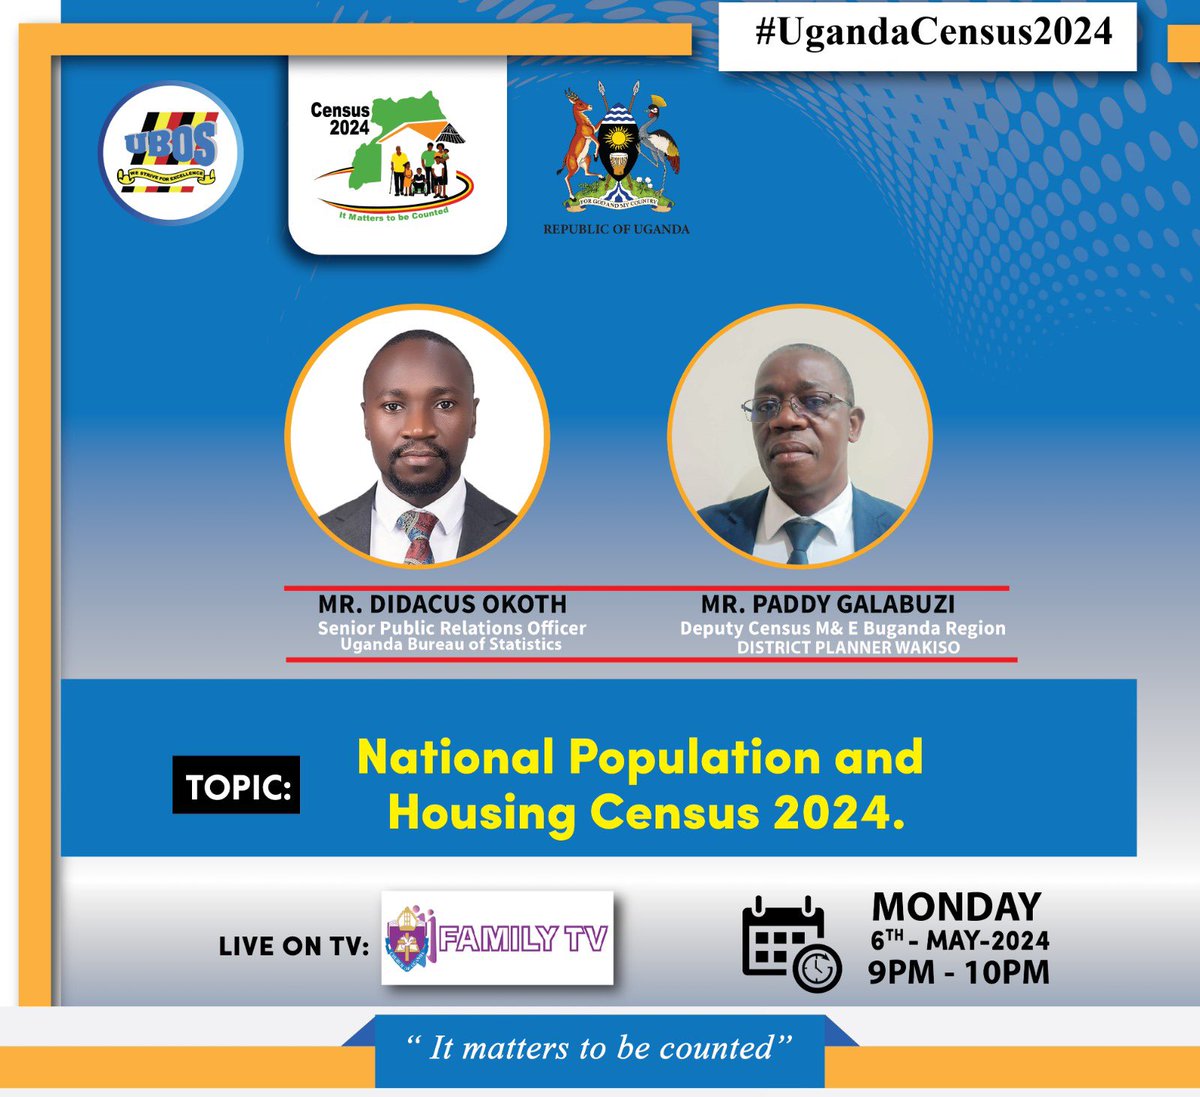 Join the discussion on the National Population and Housing Census 2024 live on Family Tv. Guests: ➡️Didacus Okoth, Senior PRO, @StatisticsUg ➡️ Paddy Galabuzi, Deputy Census M& E Buganda Region #UgandaCensus2024